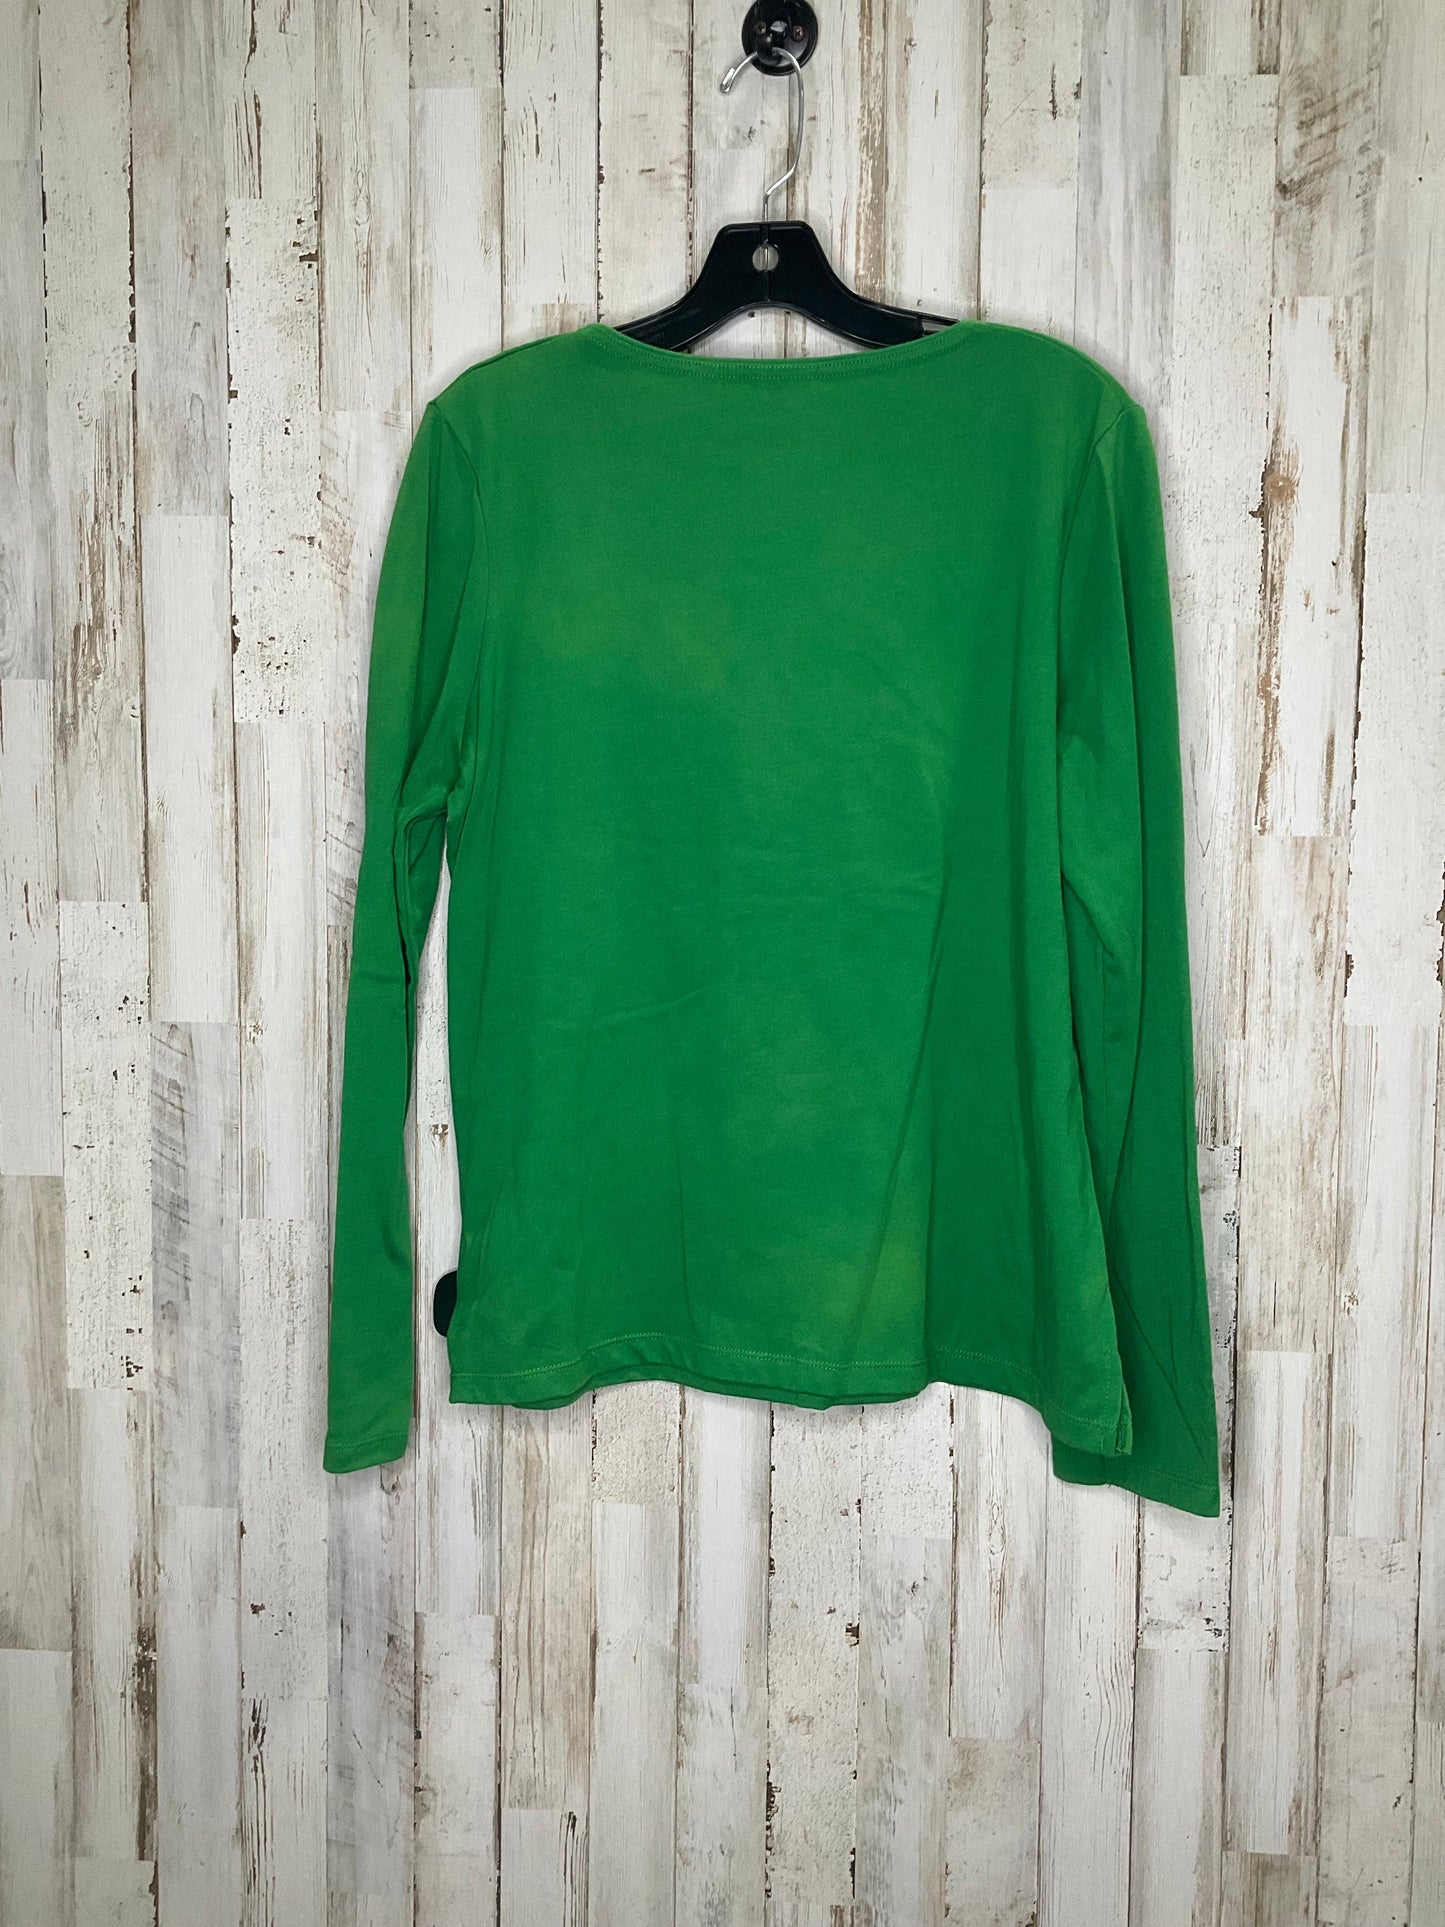 Top Long Sleeve By Bobbie Brooks  Size: L